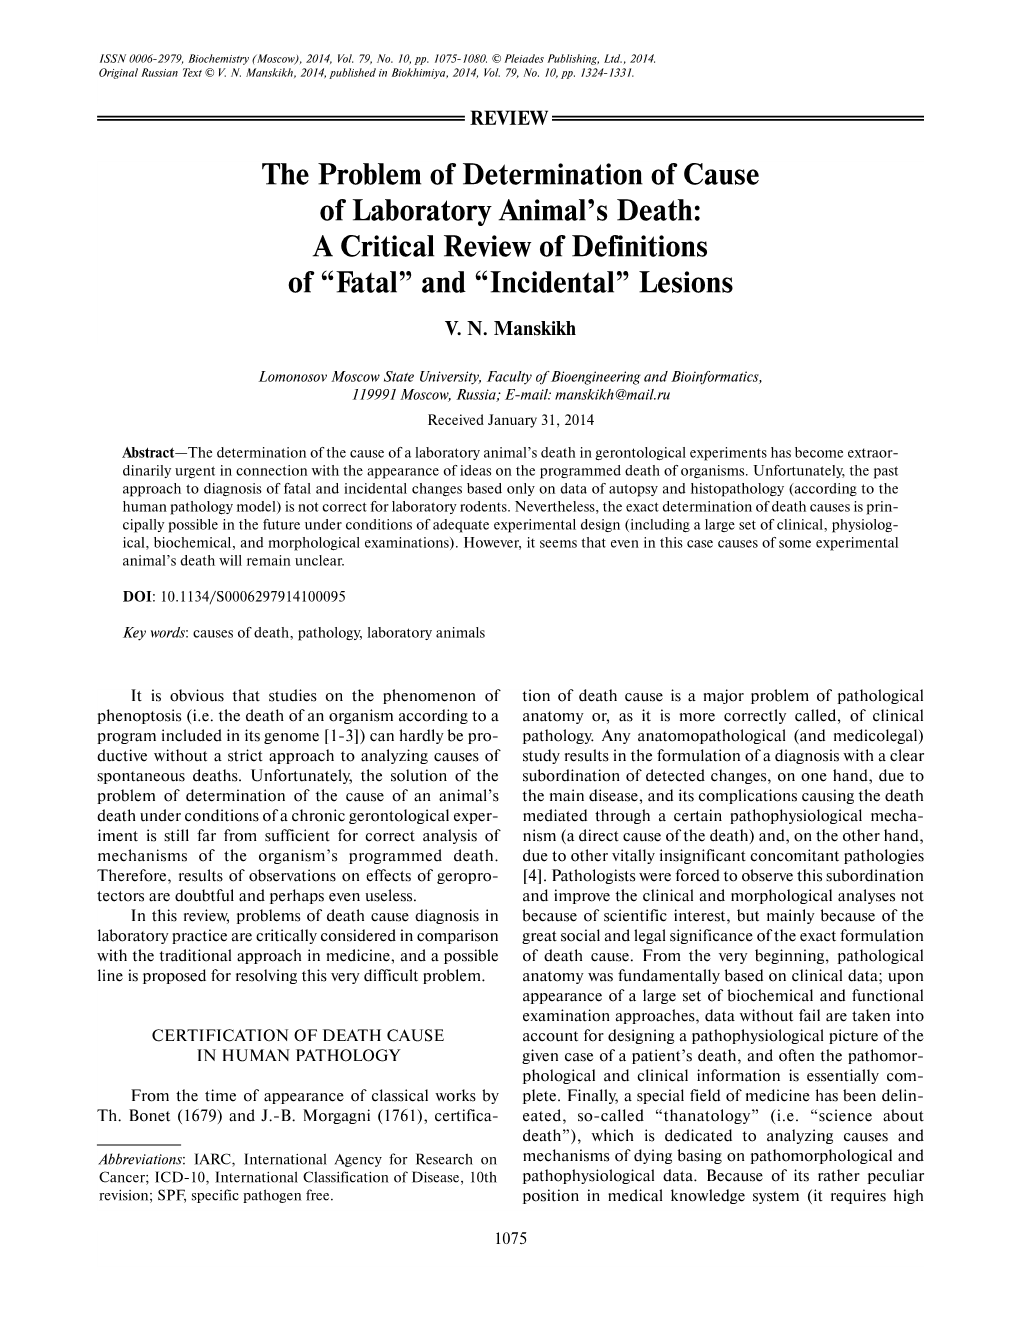 The Problem of Determination of Cause of Laboratory Animal's Death